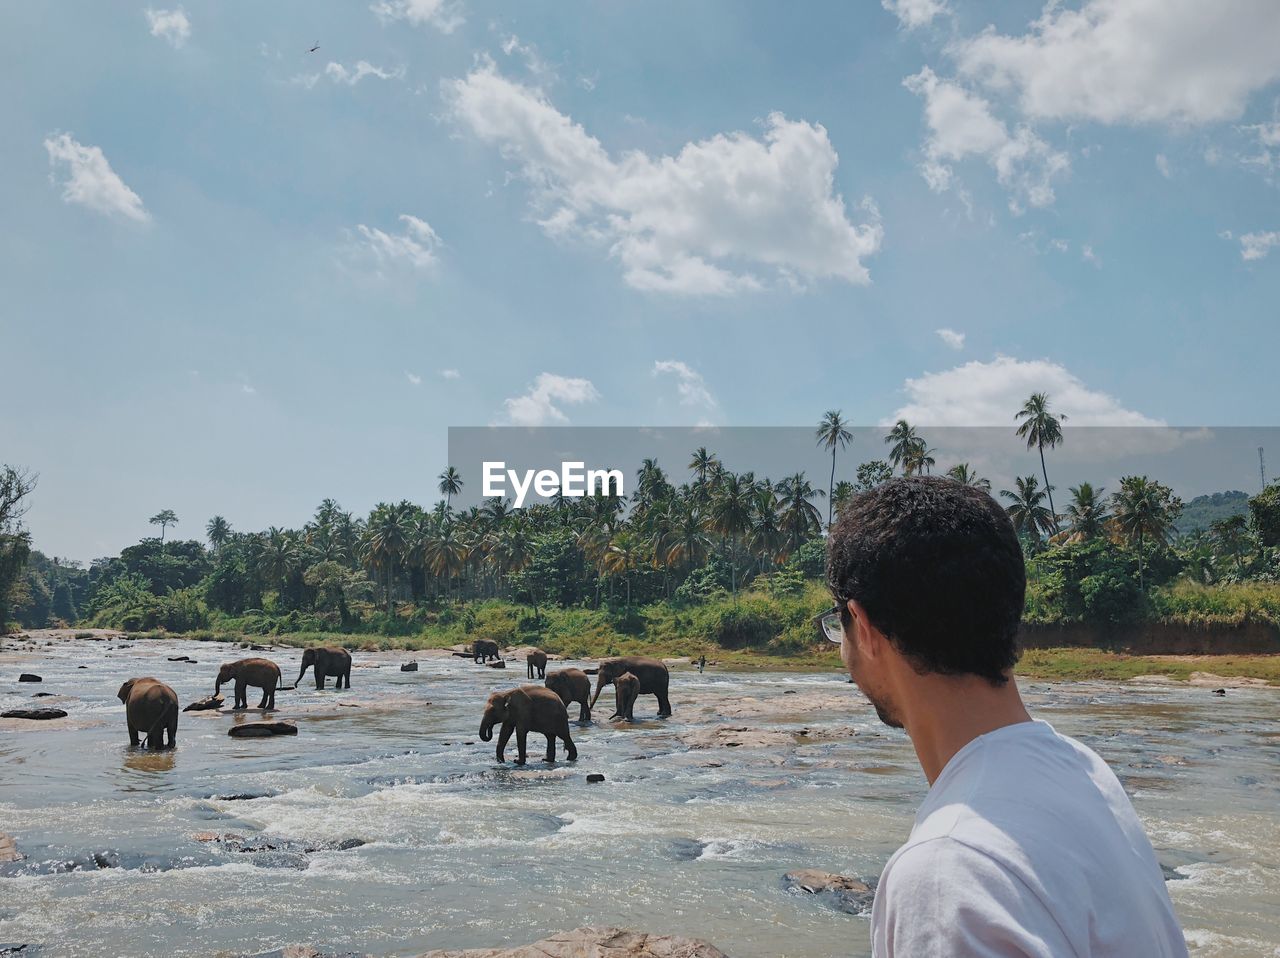 Man looking at elephants in river against sky